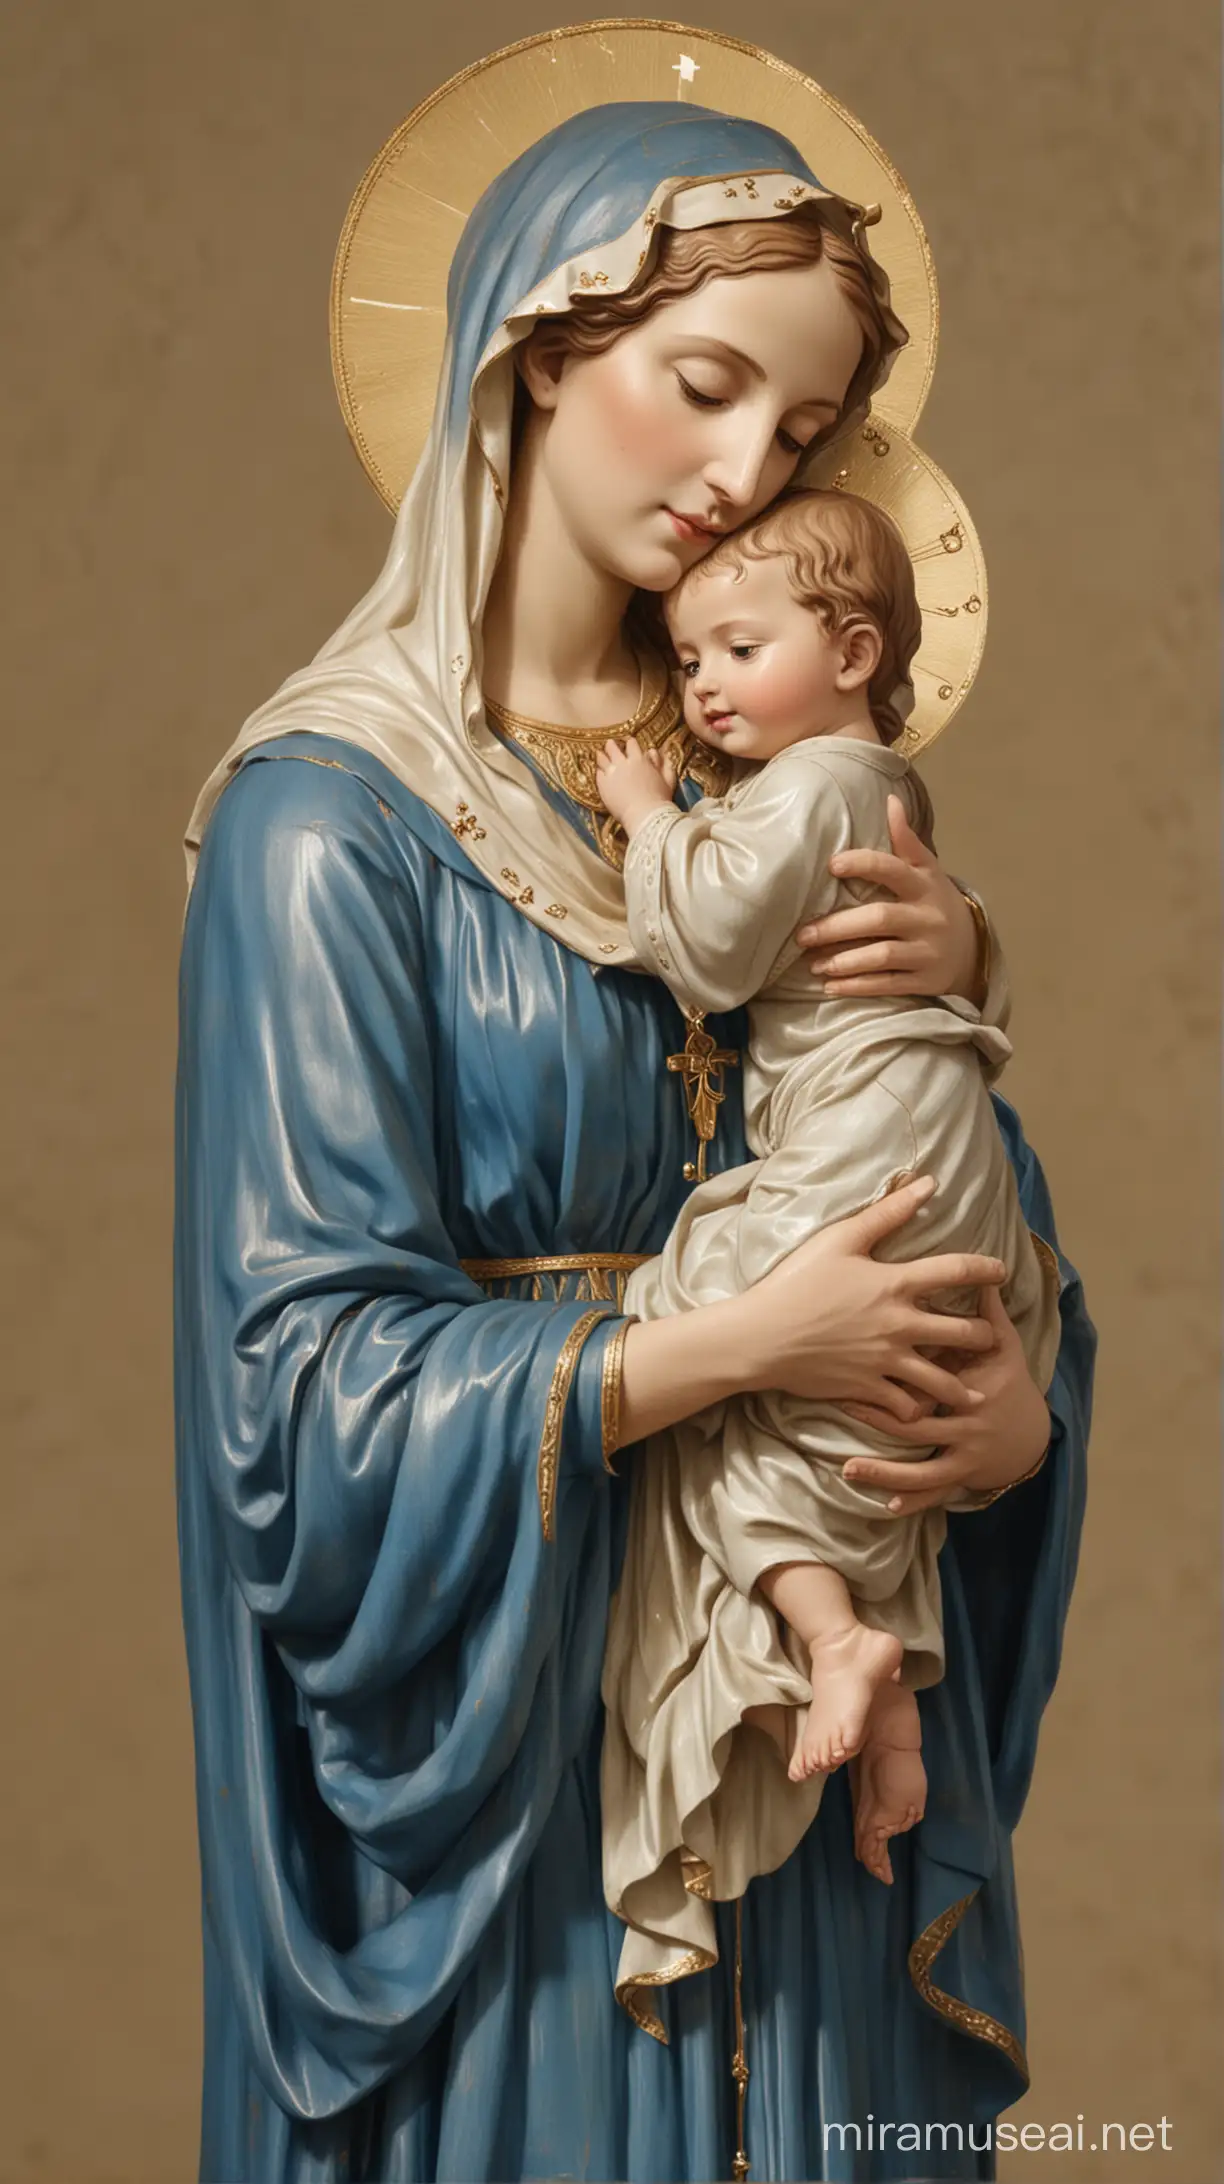 Our Lady, dressed in a blue dress, hugging a baby